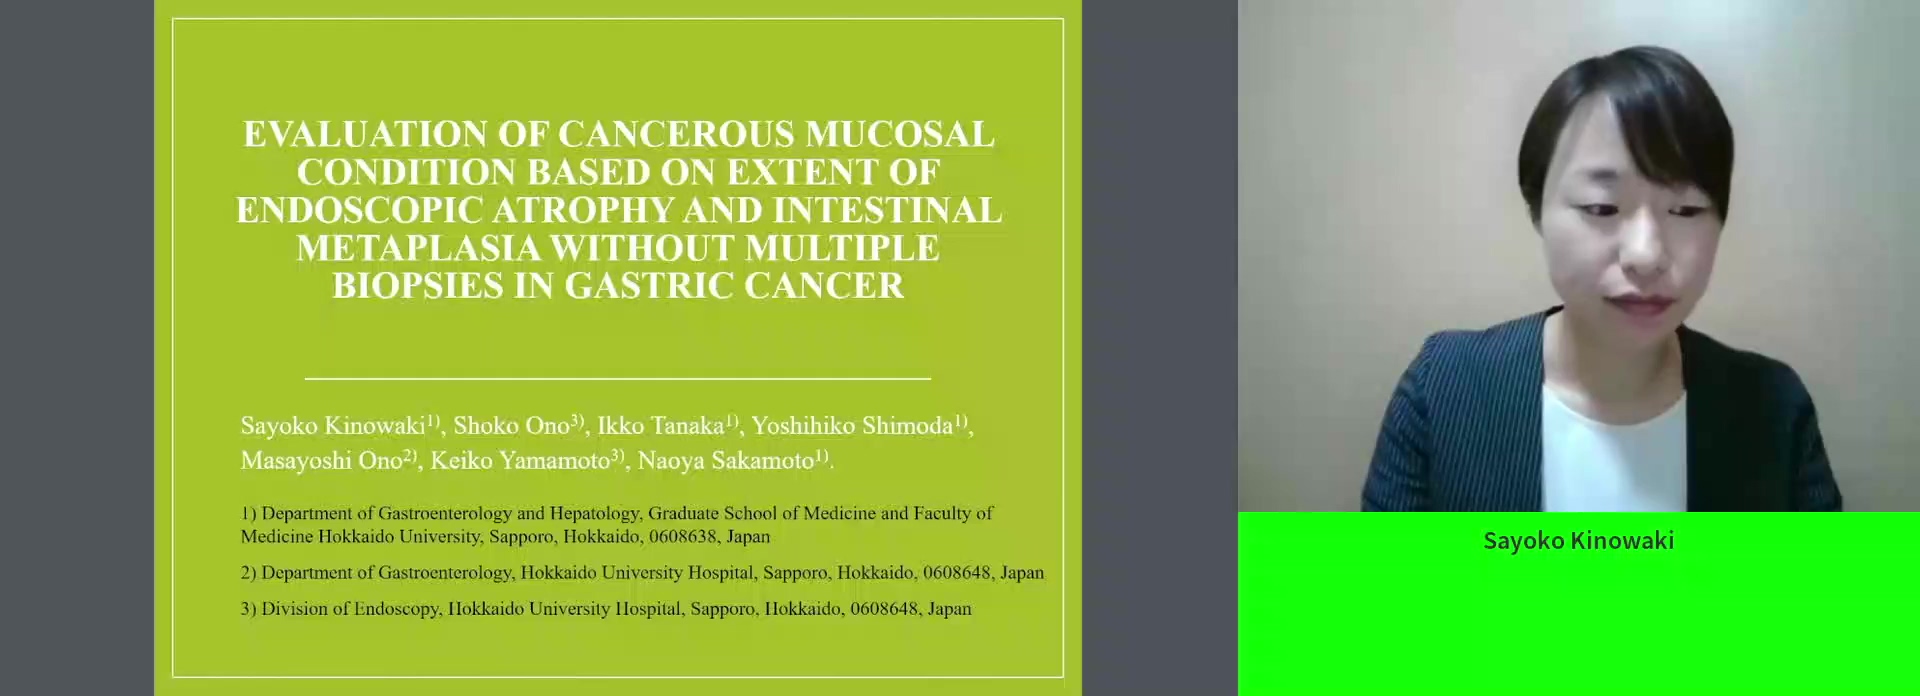 EVALUATION OF CANCEROUS MUCOSAL CONDITION BASED ON EXTENT OF ENDOSCOPIC ATROPHY AND INTESTINAL METAPLASIA WITHOUT MULTIPLE BIOPSIES IN GASTRIC CANCER